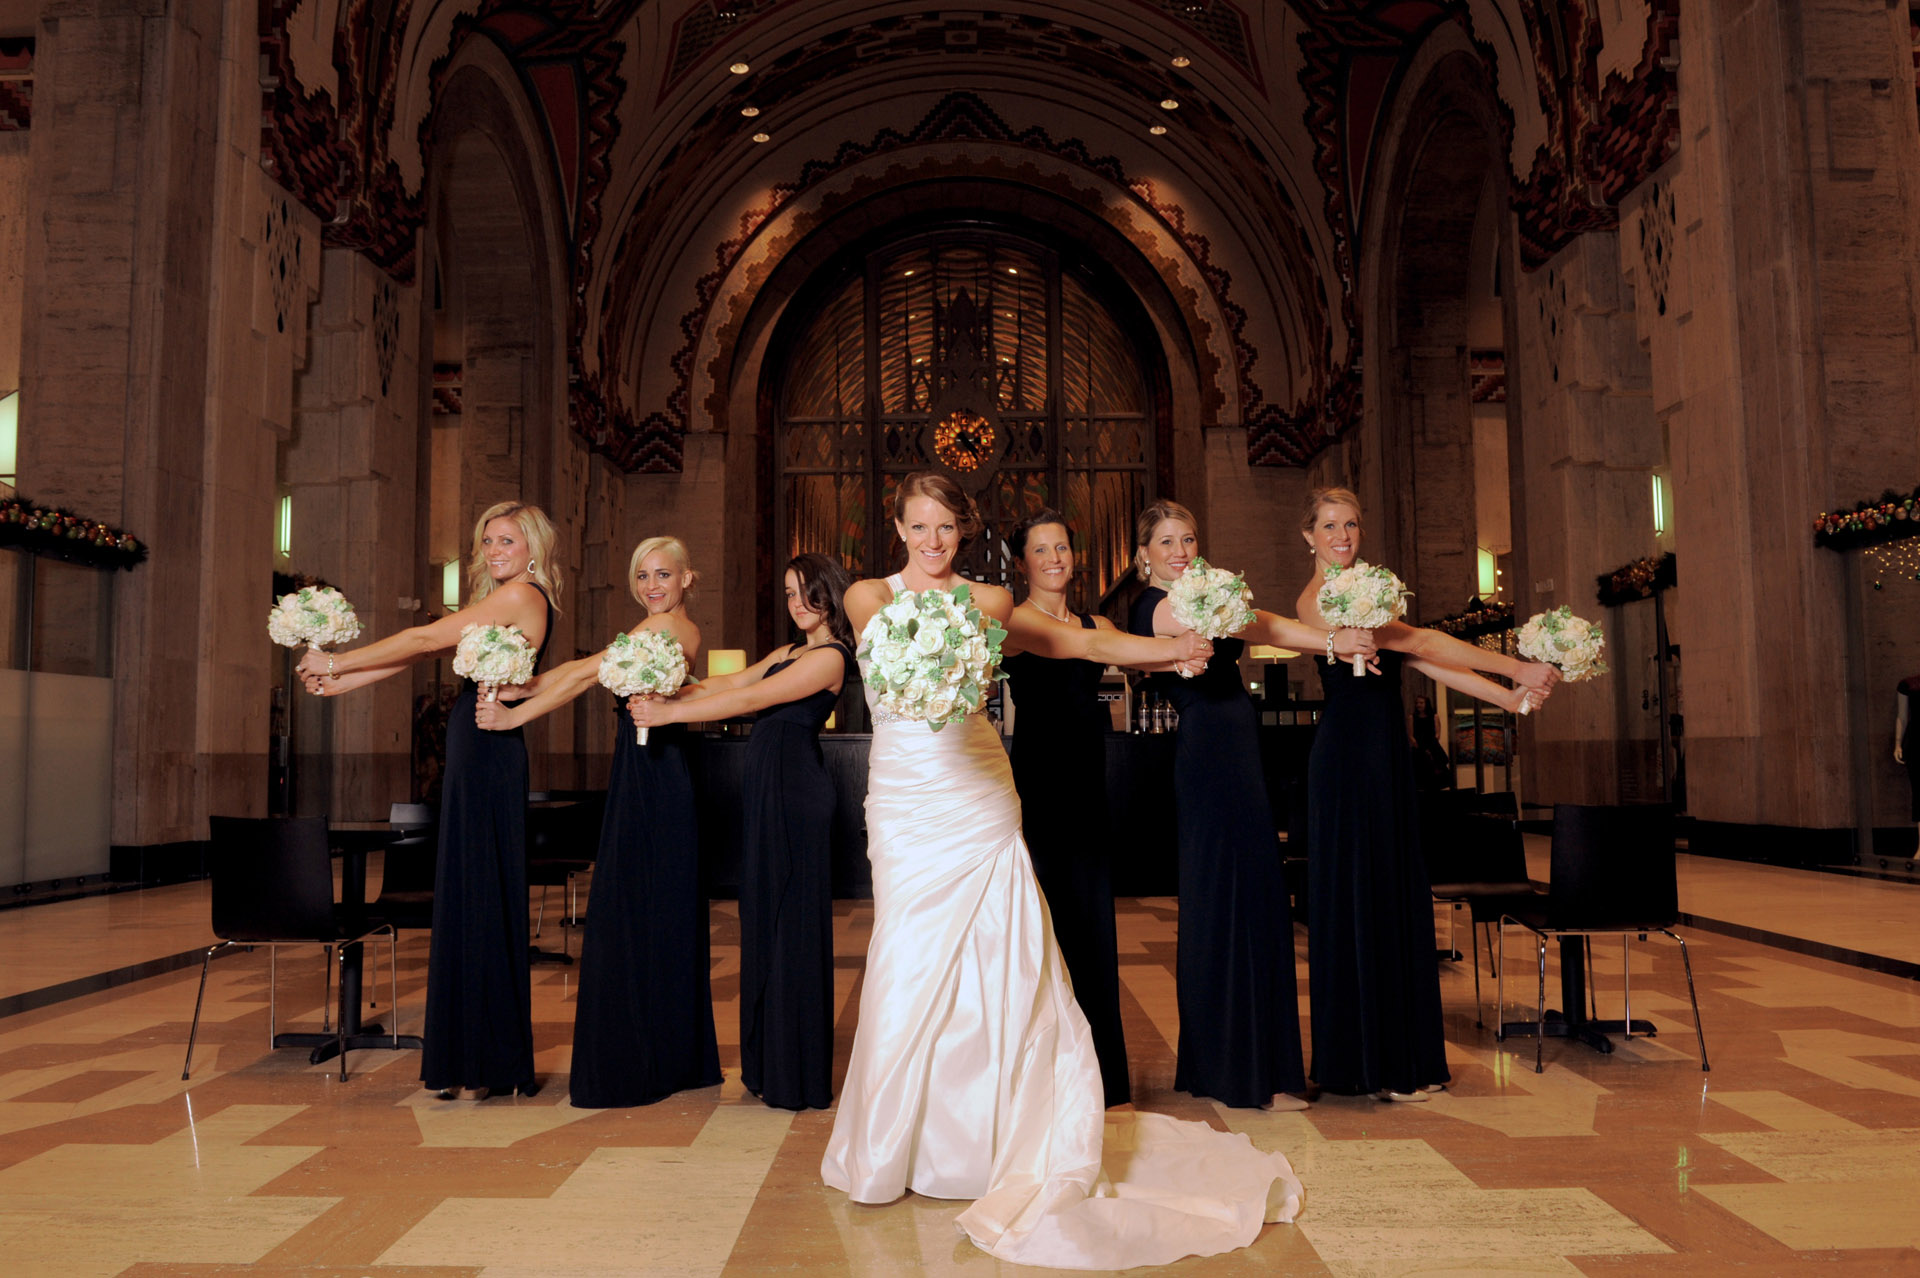 The Historic church Sweetest Heart of Mary and the Dearborn Inn of Detroit's historic church in Detroit and Dearborn, Michigan wedding photographer's photo of the bride and her bridesmaids at the historic Guardian building for wedding photos in Detroit, Michigan.